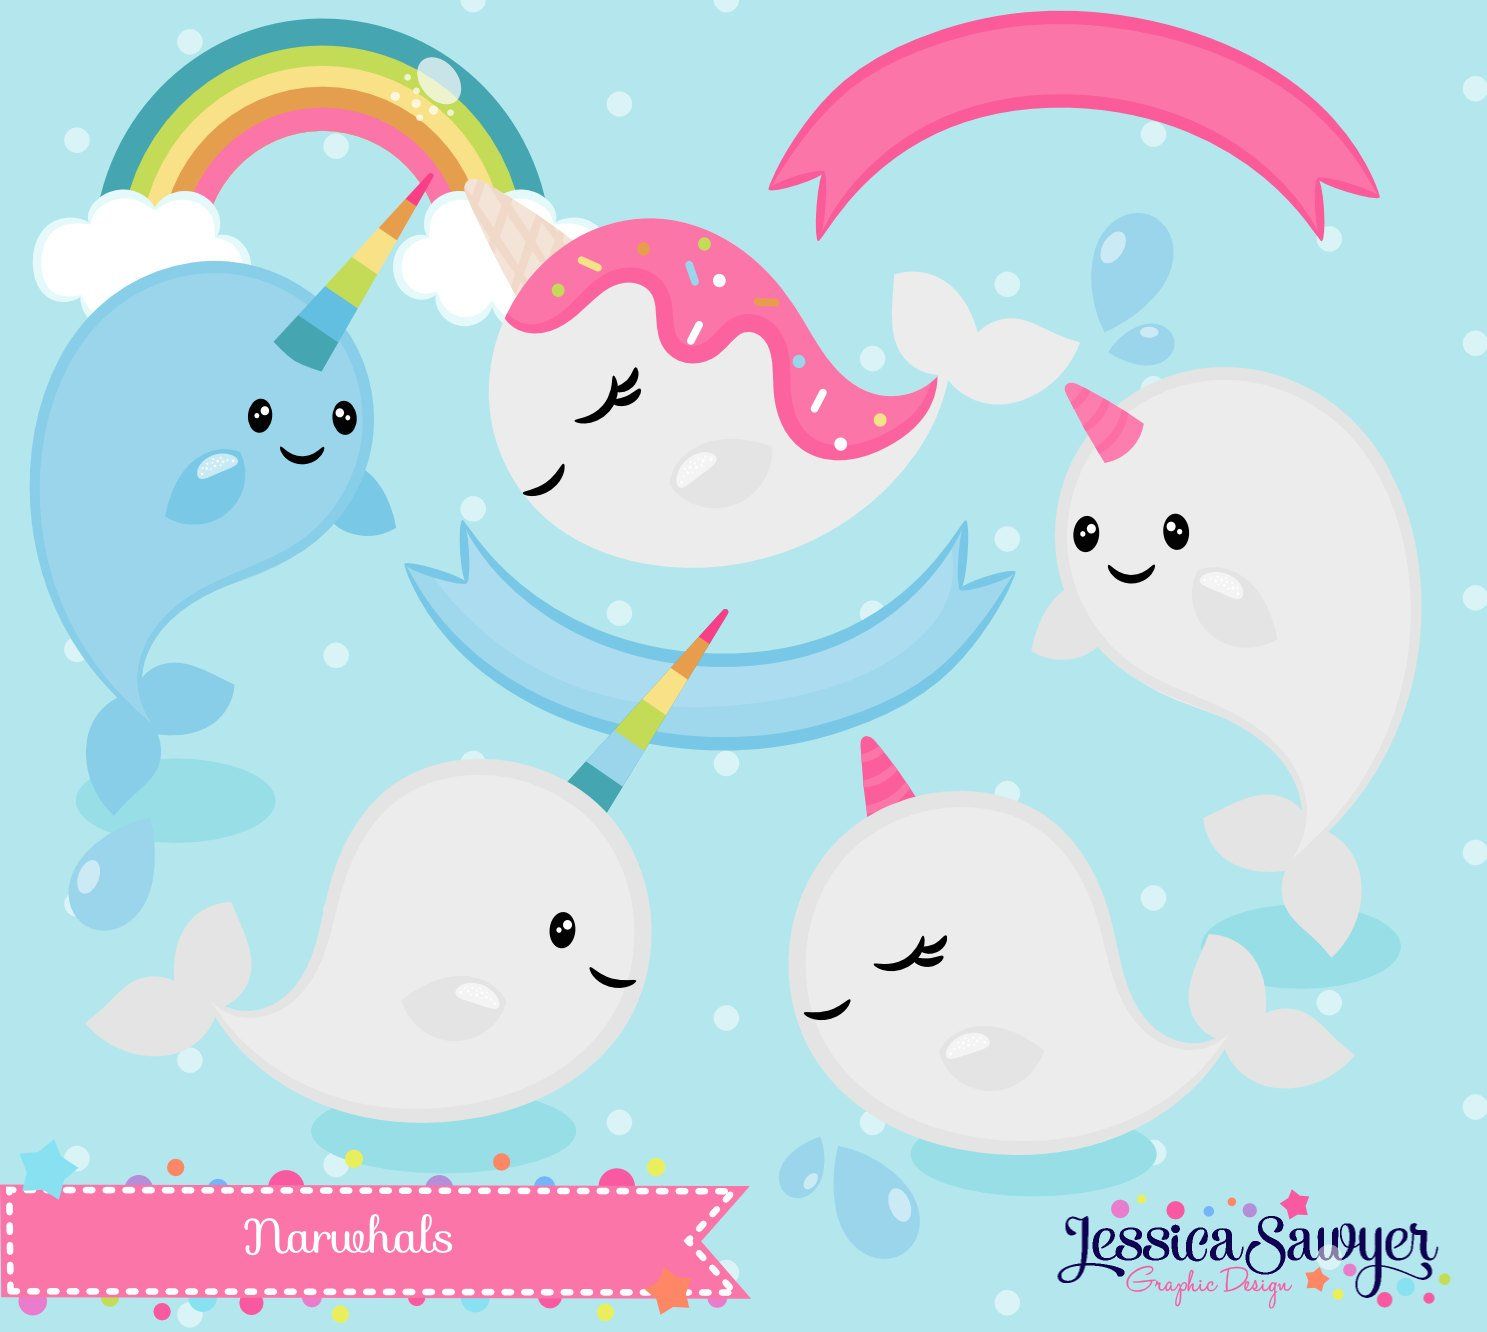 INSTANT DOWNLOAD Narwhal Clipart and Vectors for personal